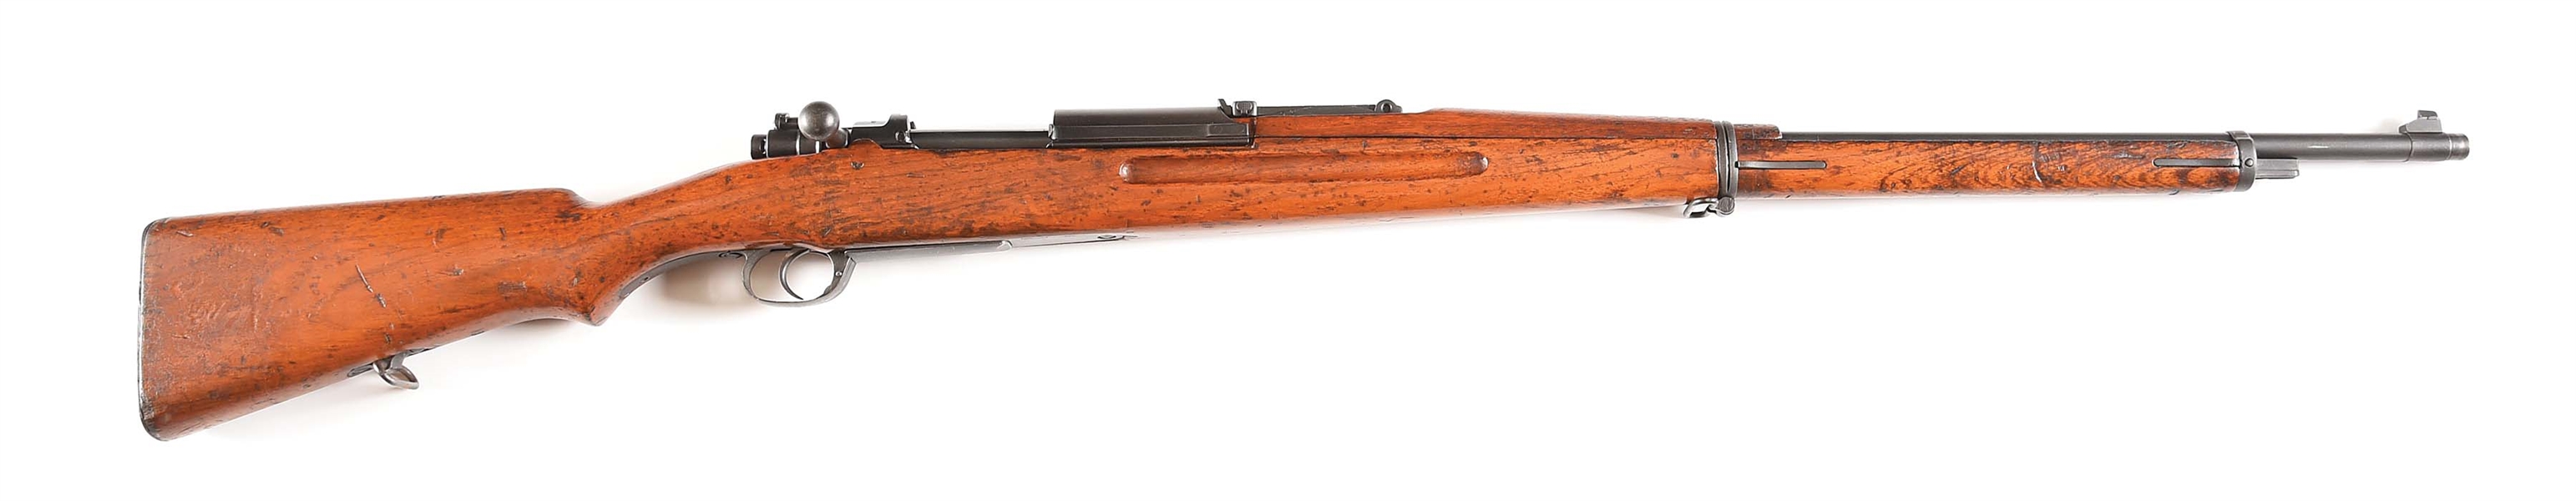 (C) SIAMESE TYPE 46/66 MAUSER BOLT ACTION RIFLE 